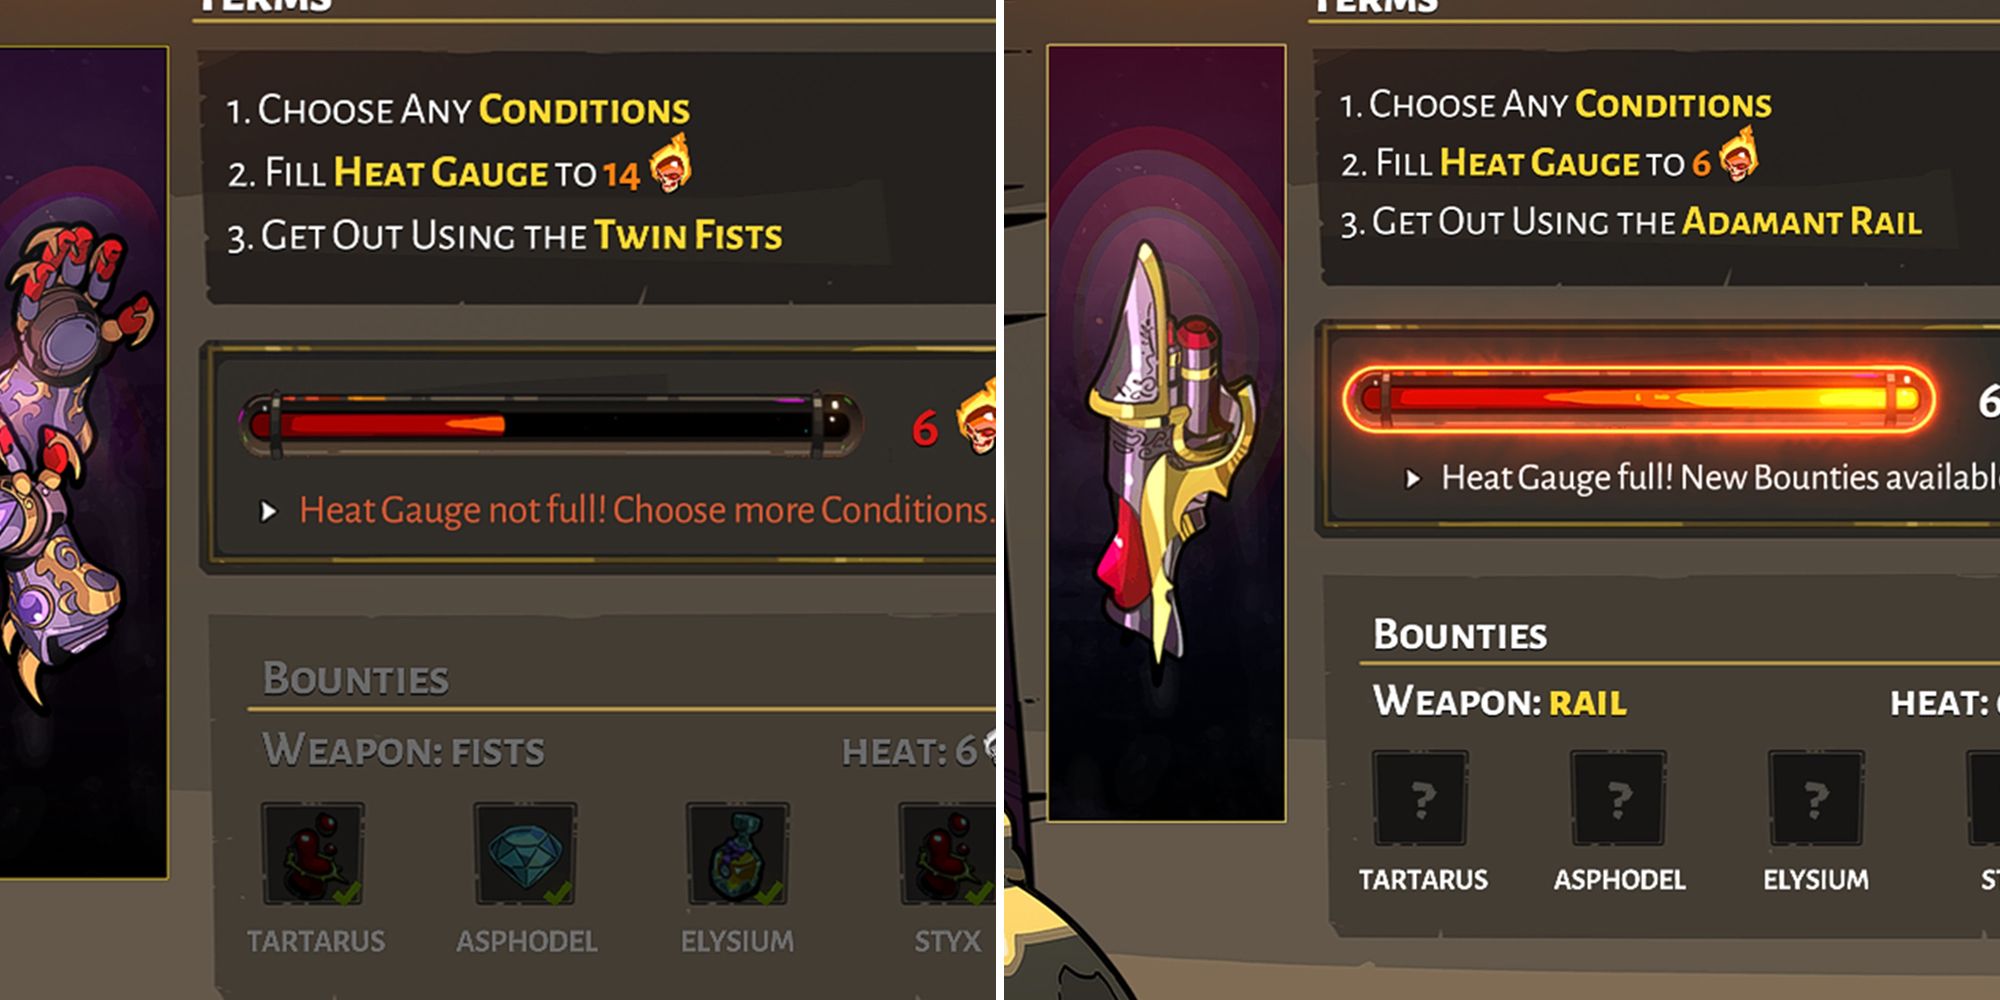 Hades - Comparing Bounties For Two Seperate Weapons At The Same Heat Level